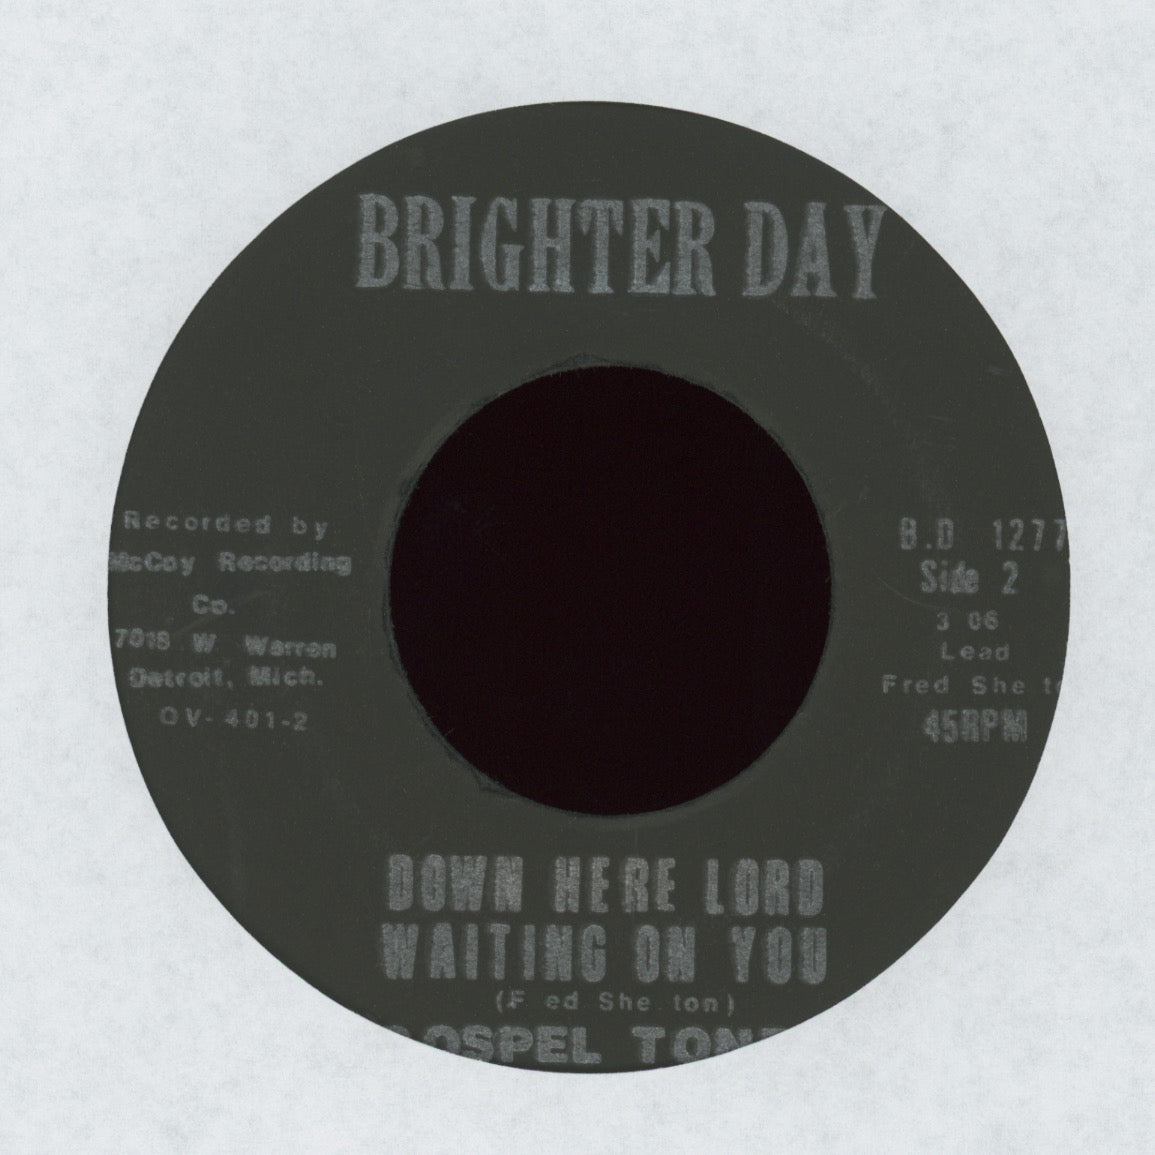 Gospel Tones (Of Detroit Mich.) - God Is Not Dead on Brighter Day